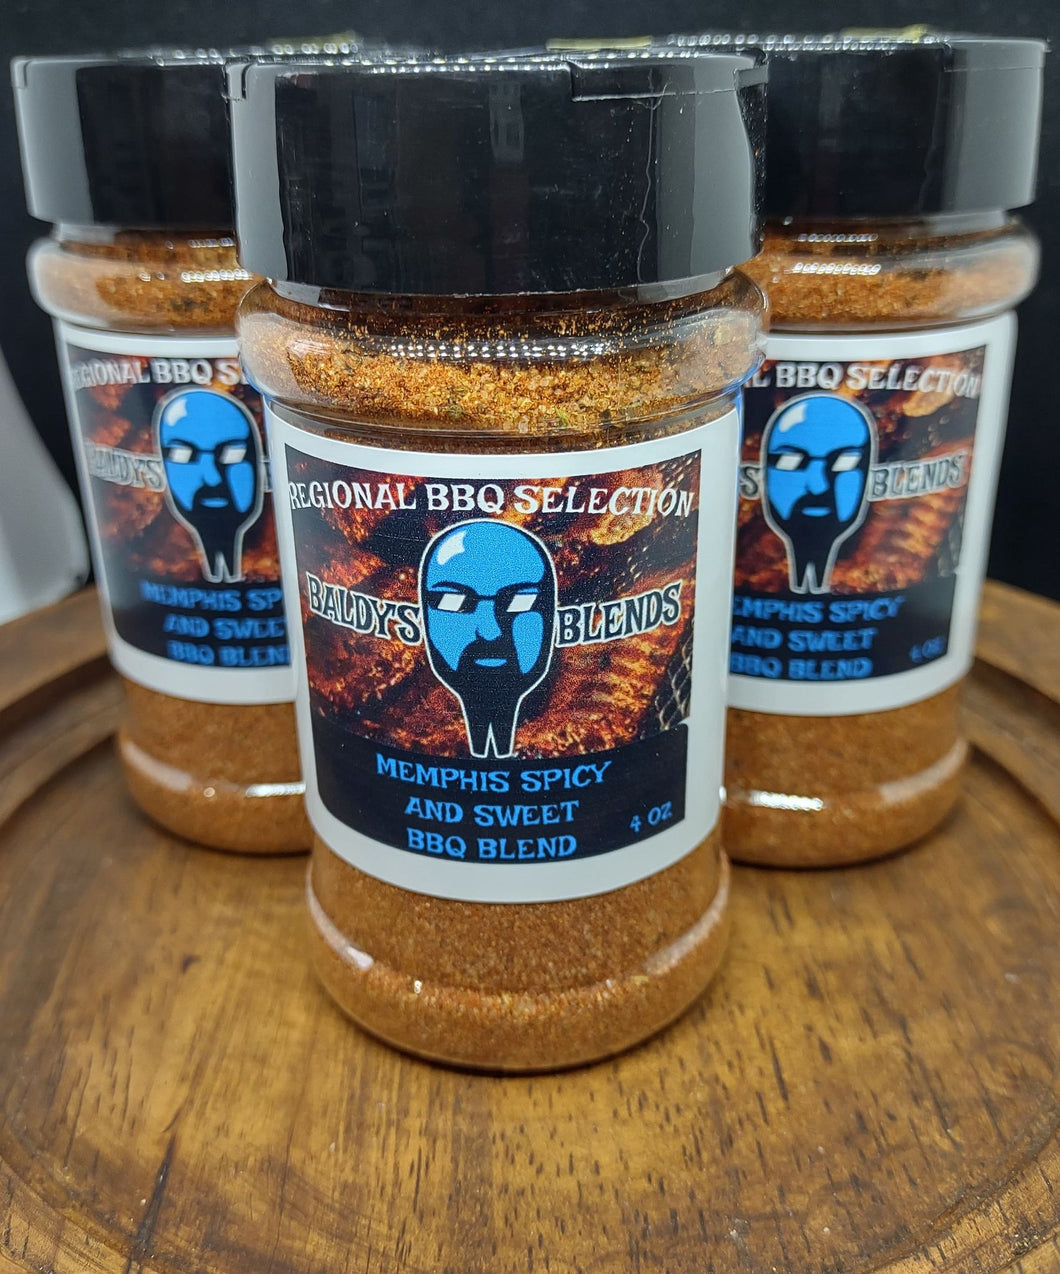 Regional BBQ Selection: Memphis Spicy and Sweet BBQ Blend